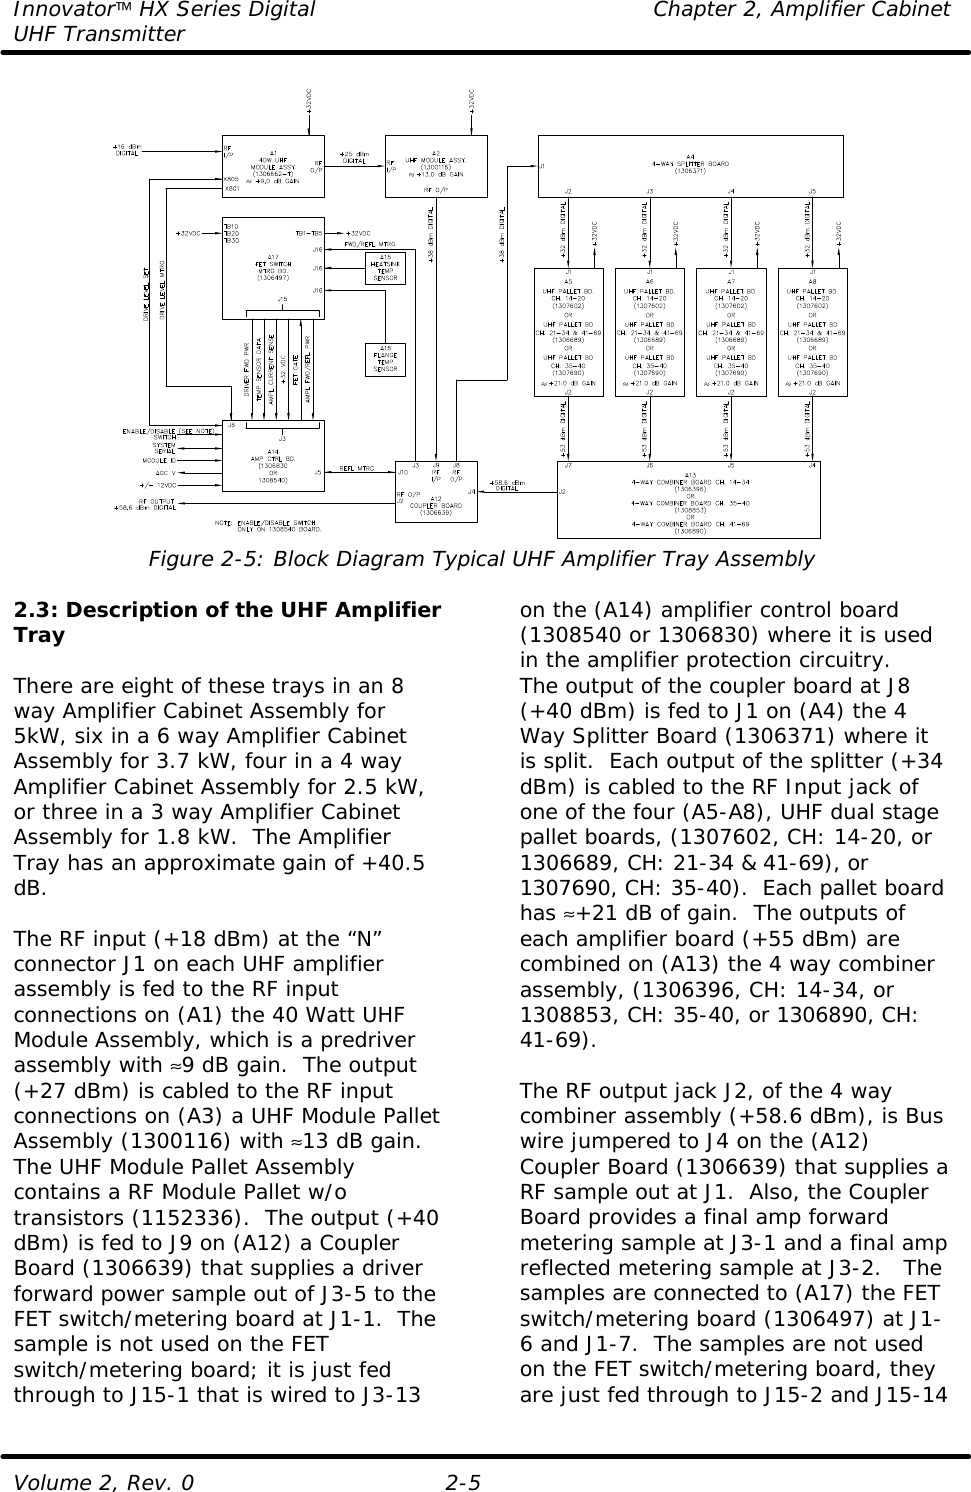 Innovator HX Series Digital Chapter 2, Amplifier Cabinet UHF Transmitter Volume 2, Rev. 0 2-5  Figure 2-5: Block Diagram Typical UHF Amplifier Tray Assembly  2.3: Description of the UHF Amplifier Tray  There are eight of these trays in an 8 way Amplifier Cabinet Assembly for 5kW, six in a 6 way Amplifier Cabinet Assembly for 3.7 kW, four in a 4 way Amplifier Cabinet Assembly for 2.5 kW, or three in a 3 way Amplifier Cabinet Assembly for 1.8 kW.  The Amplifier Tray has an approximate gain of +40.5 dB.  The RF input (+18 dBm) at the “N” connector J1 on each UHF amplifier assembly is fed to the RF input connections on (A1) the 40 Watt UHF Module Assembly, which is a predriver assembly with ≈9 dB gain.  The output (+27 dBm) is cabled to the RF input connections on (A3) a UHF Module Pallet Assembly (1300116) with ≈13 dB gain.  The UHF Module Pallet Assembly contains a RF Module Pallet w/o transistors (1152336).  The output (+40 dBm) is fed to J9 on (A12) a Coupler Board (1306639) that supplies a driver forward power sample out of J3-5 to the FET switch/metering board at J1-1.  The sample is not used on the FET switch/metering board; it is just fed through to J15-1 that is wired to J3-13 on the (A14) amplifier control board (1308540 or 1306830) where it is used in the amplifier protection circuitry. The output of the coupler board at J8 (+40 dBm) is fed to J1 on (A4) the 4 Way Splitter Board (1306371) where it is split.  Each output of the splitter (+34 dBm) is cabled to the RF Input jack of one of the four (A5-A8), UHF dual stage pallet boards, (1307602, CH: 14-20, or 1306689, CH: 21-34 &amp; 41-69), or 1307690, CH: 35-40).  Each pallet board has ≈+21 dB of gain.  The outputs of each amplifier board (+55 dBm) are combined on (A13) the 4 way combiner assembly, (1306396, CH: 14-34, or 1308853, CH: 35-40, or 1306890, CH: 41-69).  The RF output jack J2, of the 4 way combiner assembly (+58.6 dBm), is Bus wire jumpered to J4 on the (A12) Coupler Board (1306639) that supplies a RF sample out at J1.  Also, the Coupler Board provides a final amp forward metering sample at J3-1 and a final amp reflected metering sample at J3-2.   The samples are connected to (A17) the FET switch/metering board (1306497) at J1-6 and J1-7.  The samples are not used on the FET switch/metering board, they are just fed through to J15-2 and J15-14 